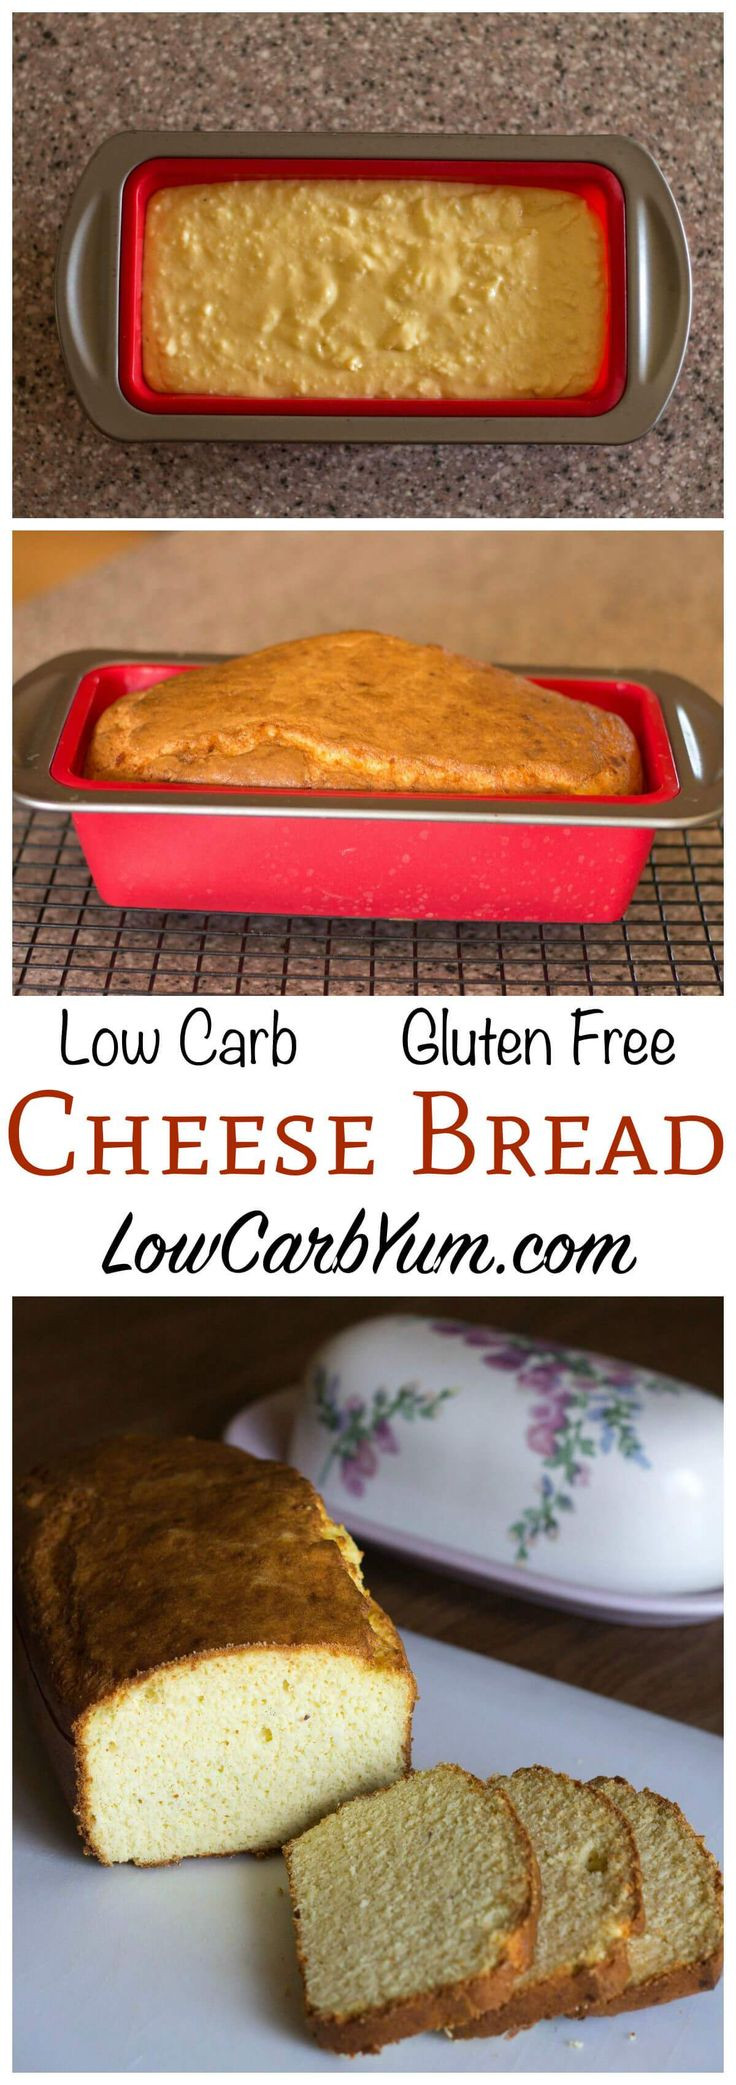 Low Carb Egg Bread
 Cheese Gluten Free Low Carb Bread Recipe